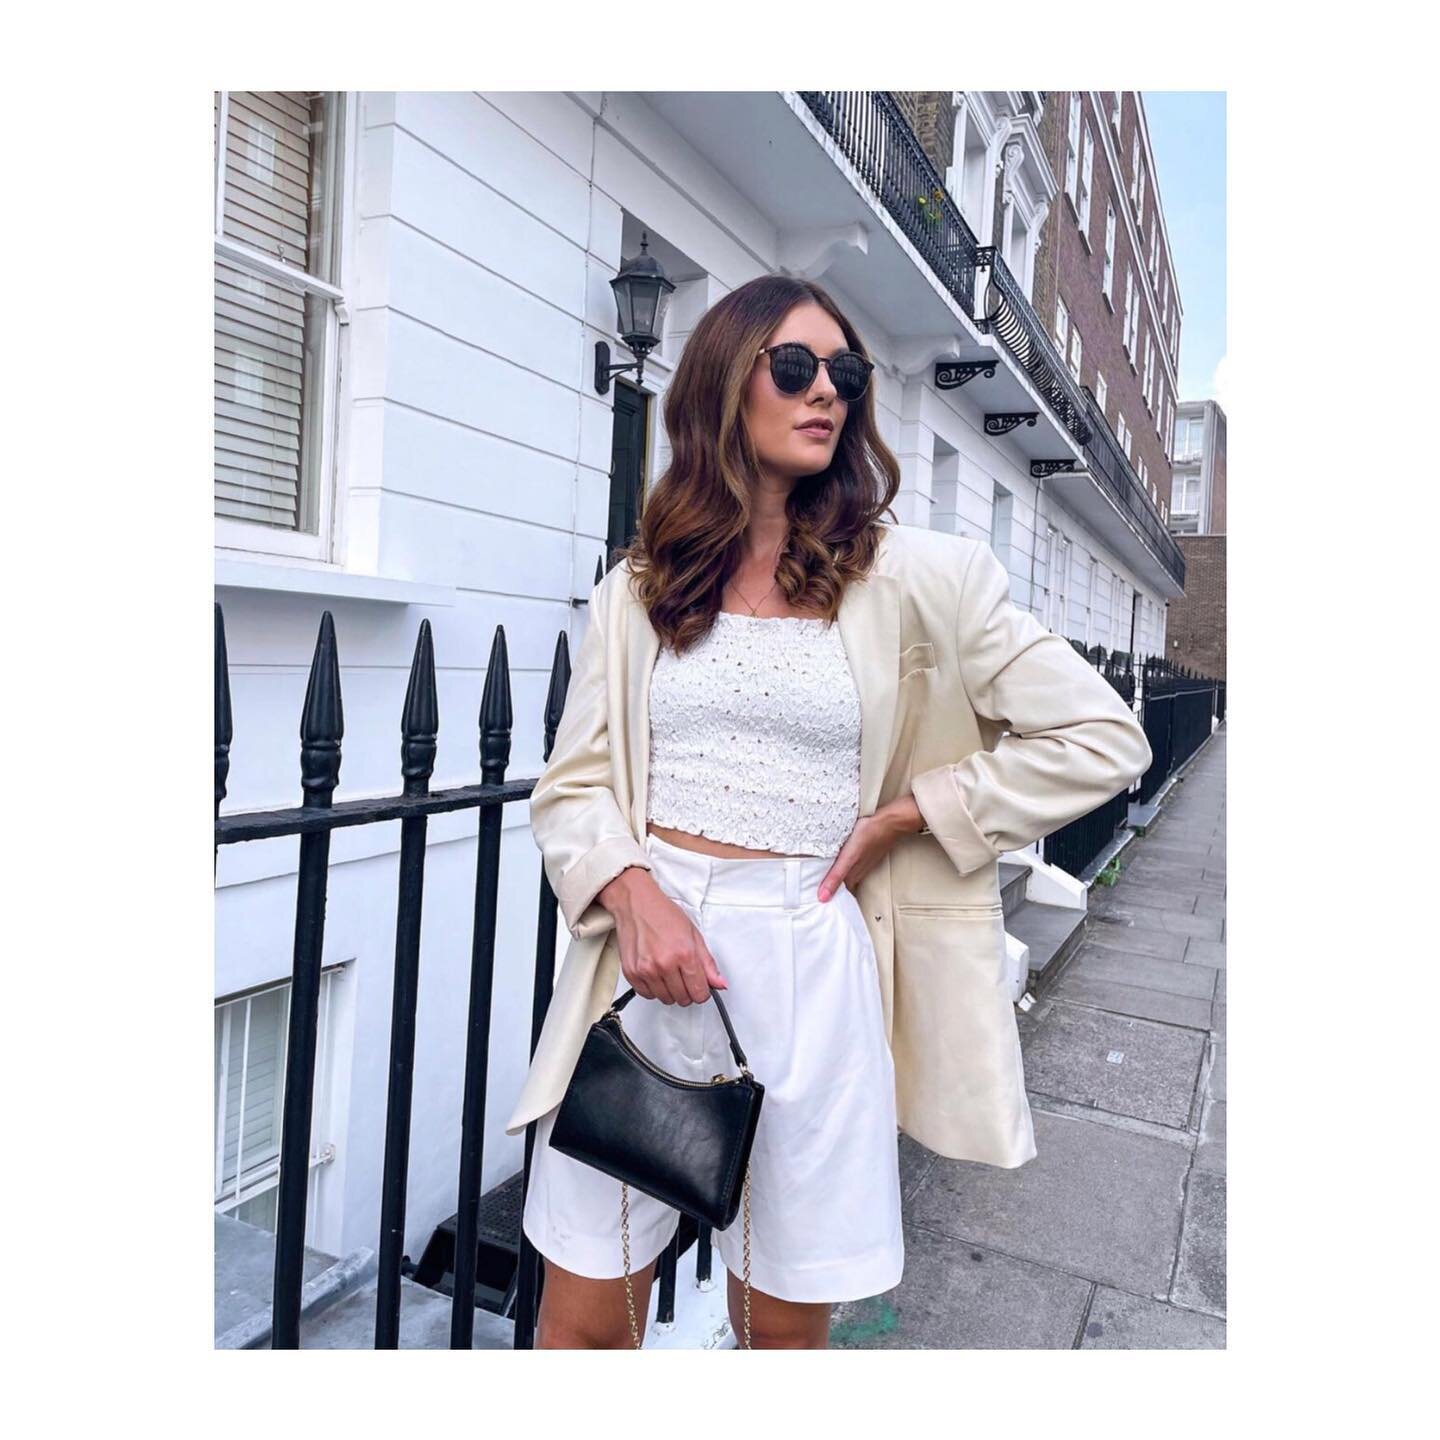 LOVE

Our lovely client &amp; super stylish human Saffron looking absolute summer goals in this capture, with not a flushed cheek or hair out of place (unlike the rest of us today haha!!) 
The embodiment of summer chic 👌🏻

📷 @saffydixon 
Stylist: 